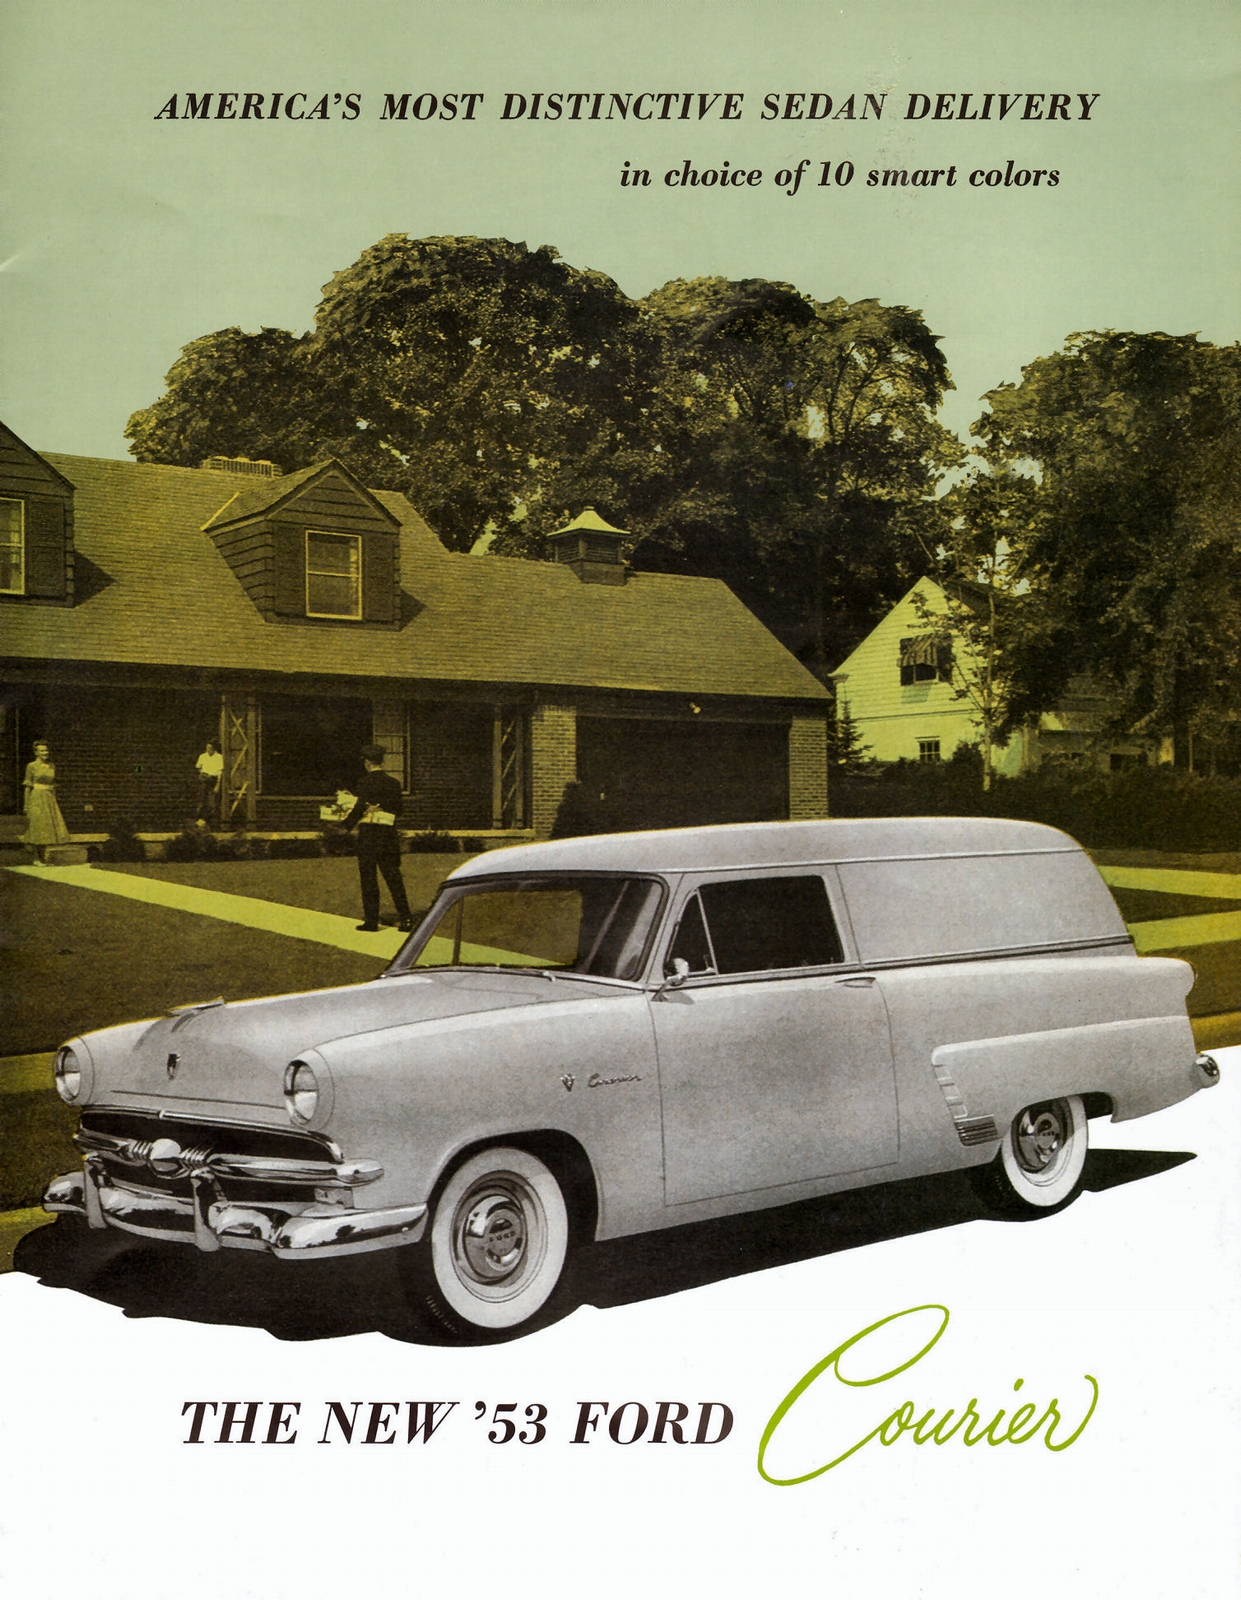 n_1953 Ford Courier-01.jpg